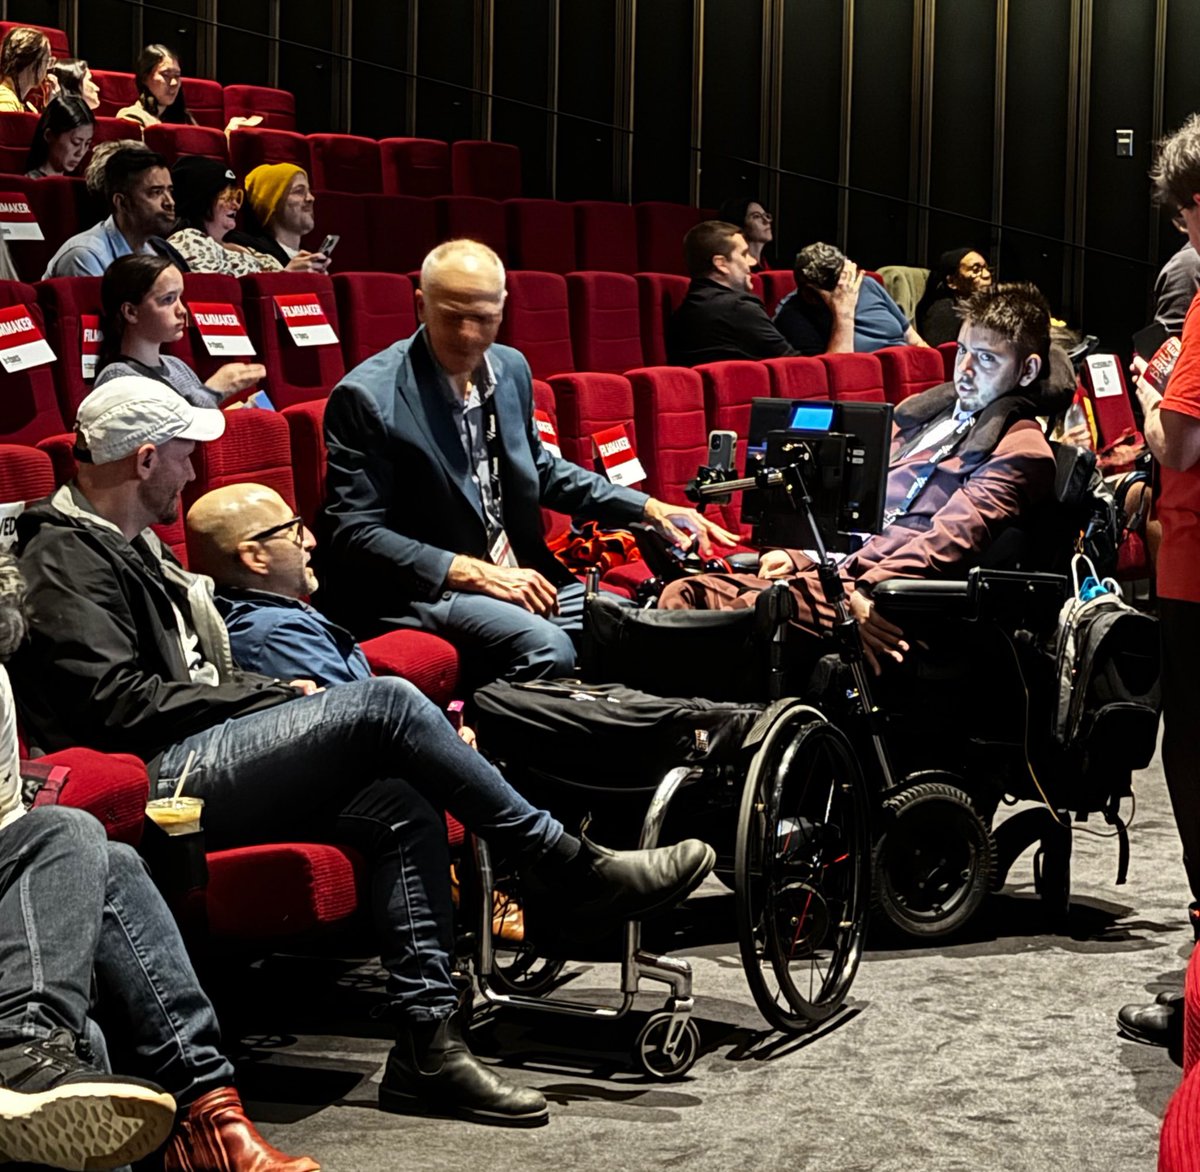 Samuel Habib is continuing to meet amazing disability activists along the way, including @andrewgurza6, @maayanziv and @spencer2thewest at @HotDocs!